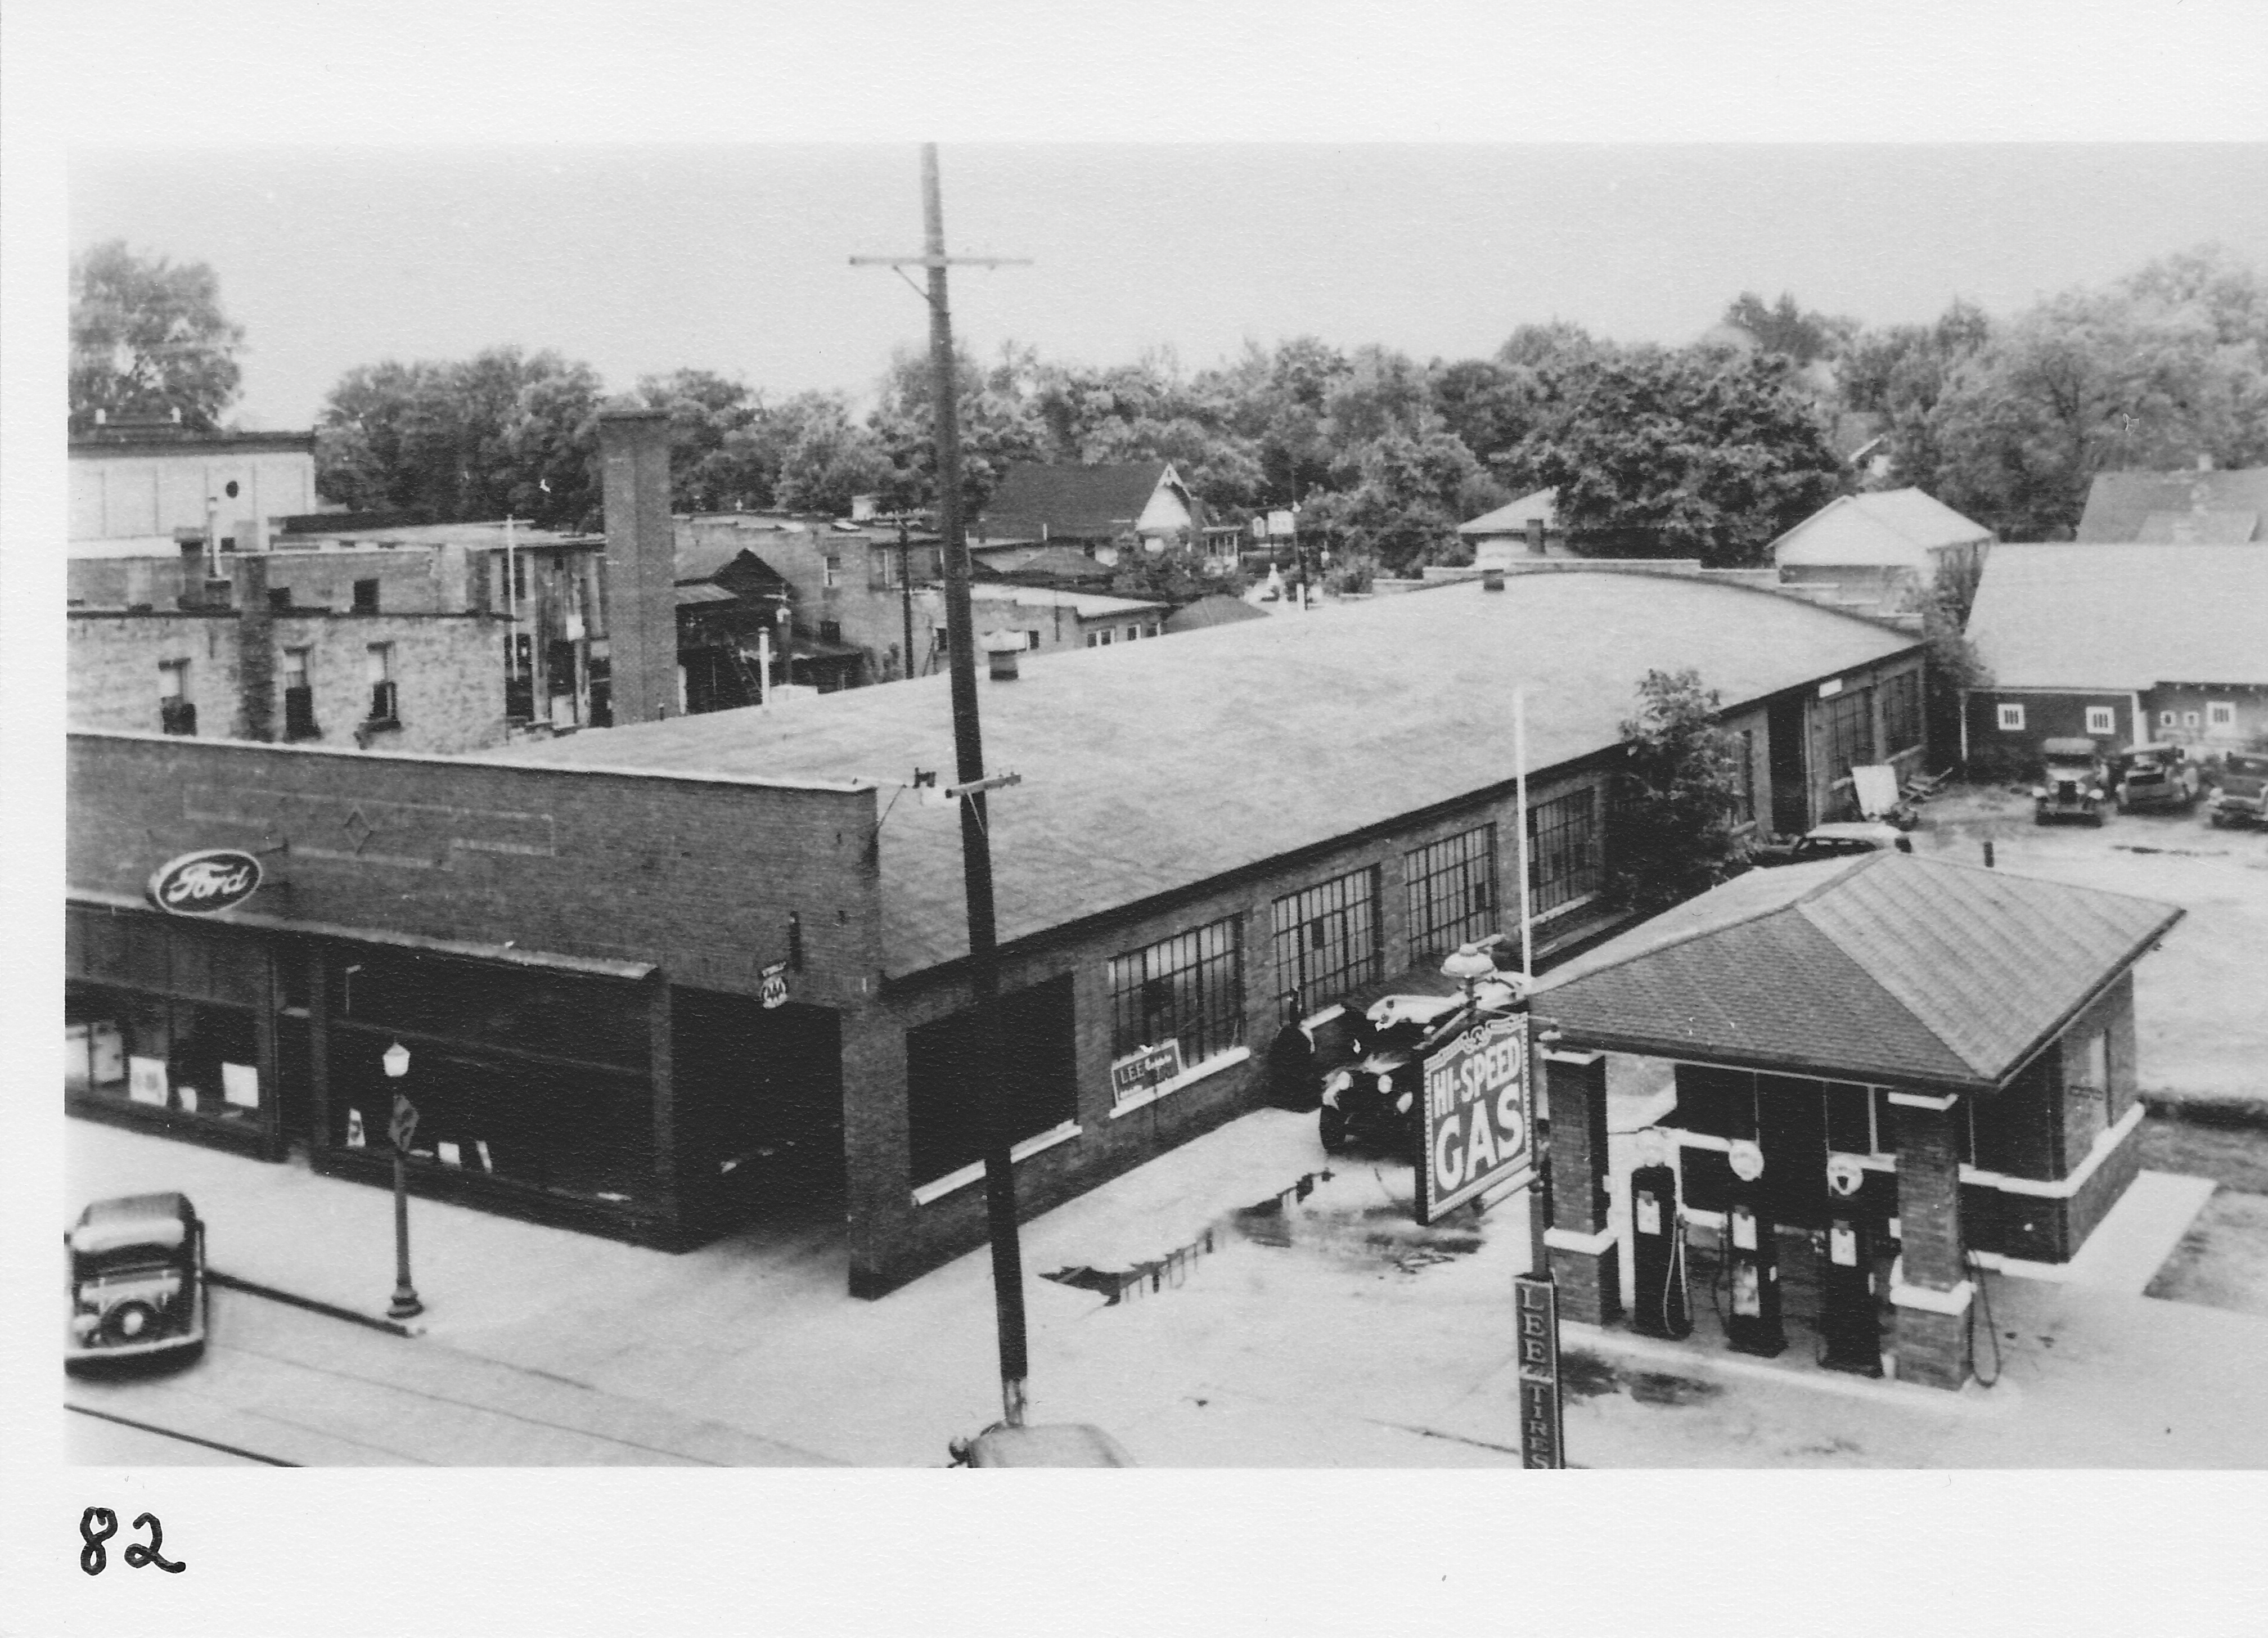 Swaney’s Ford Garage and Gas Station.  Main Street, north side.  Built in 1926.  Later a bowling alley and post office.